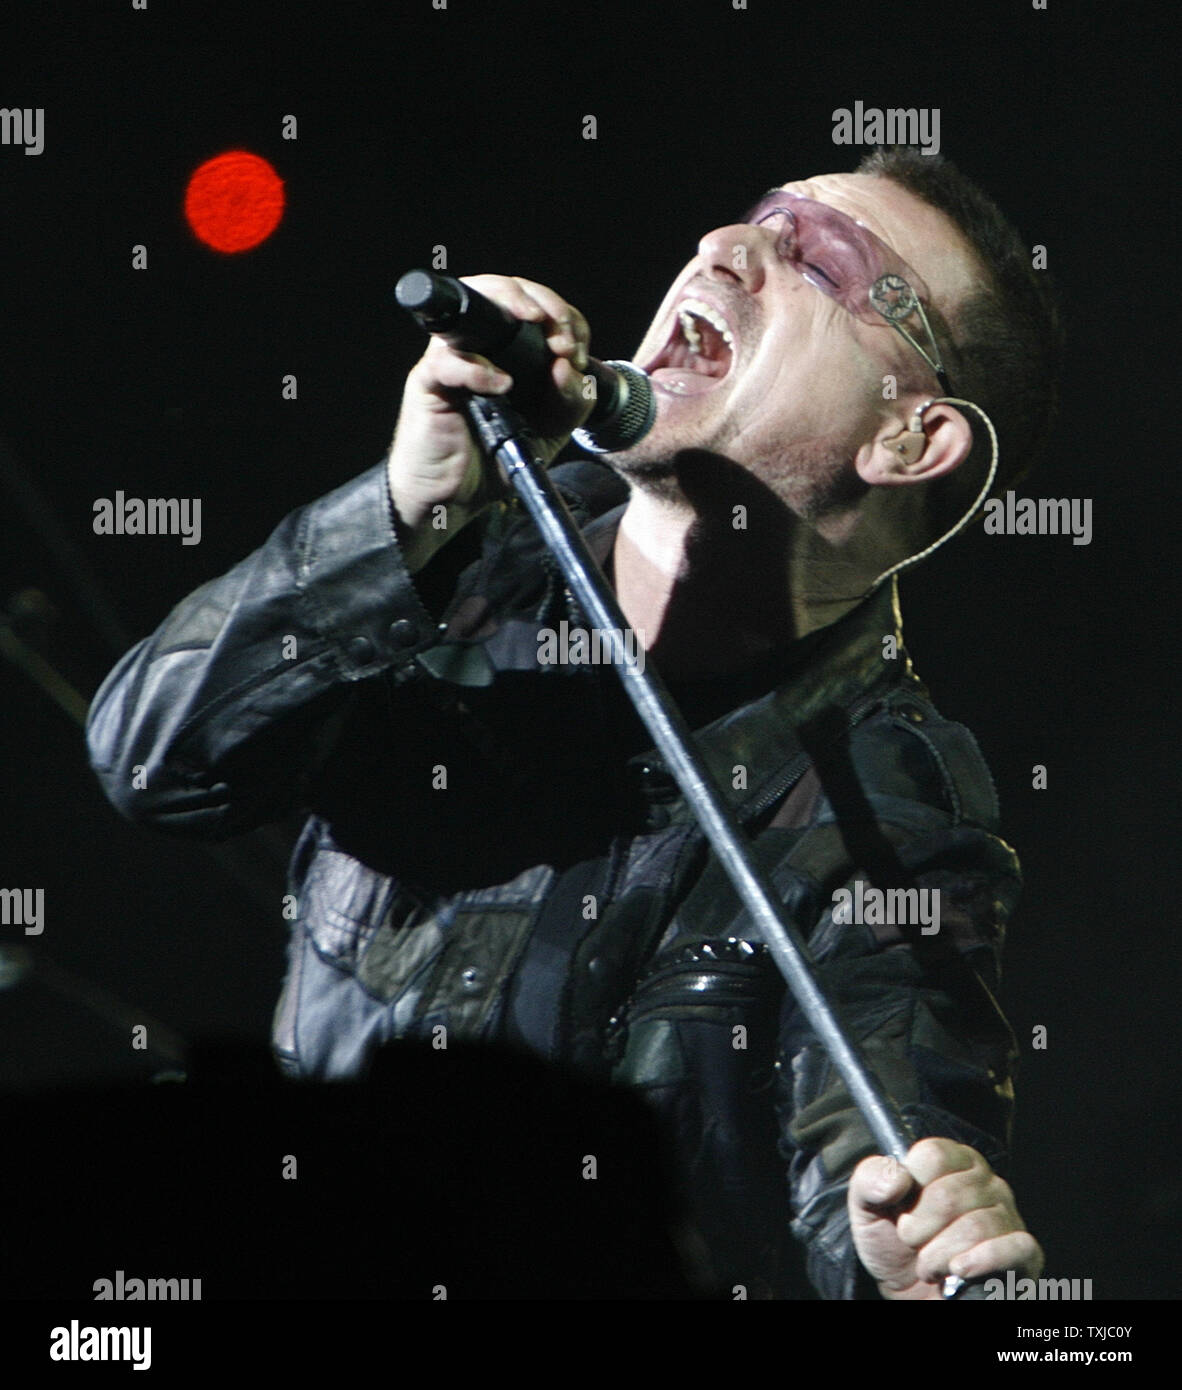 Bono performs with U2 at the first concert of their 360 Degree North American Tour at Soldier Field in Chicago on September 12, 2009.     UPI/Brian Kersey Stock Photo